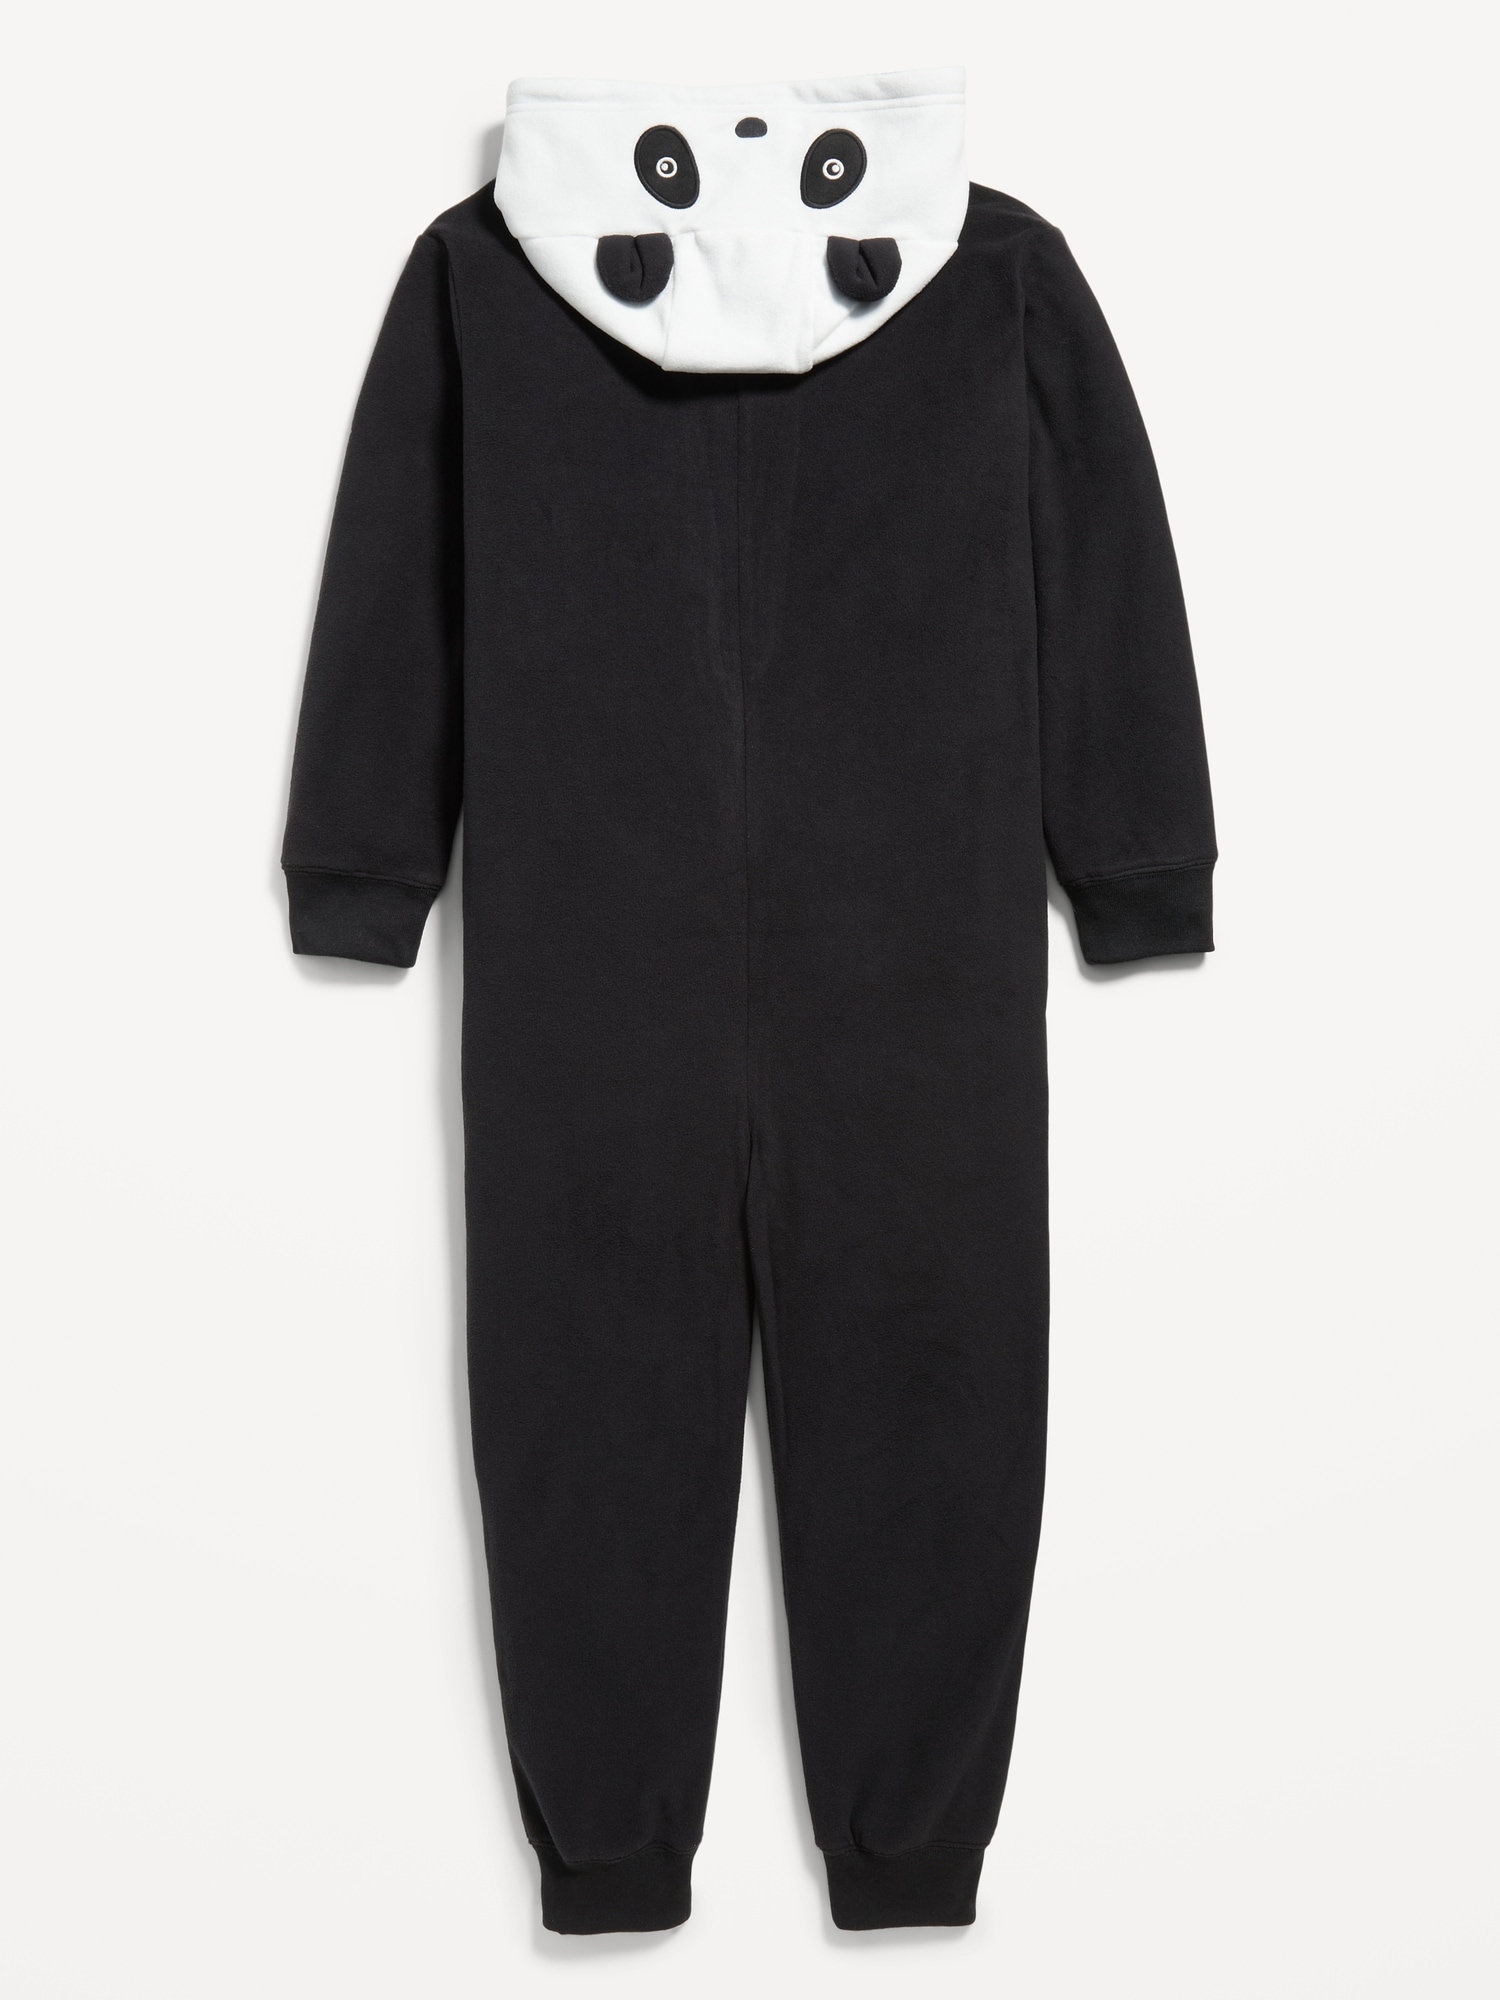 Gender-Neutral Panda One-Piece Costume for Kids